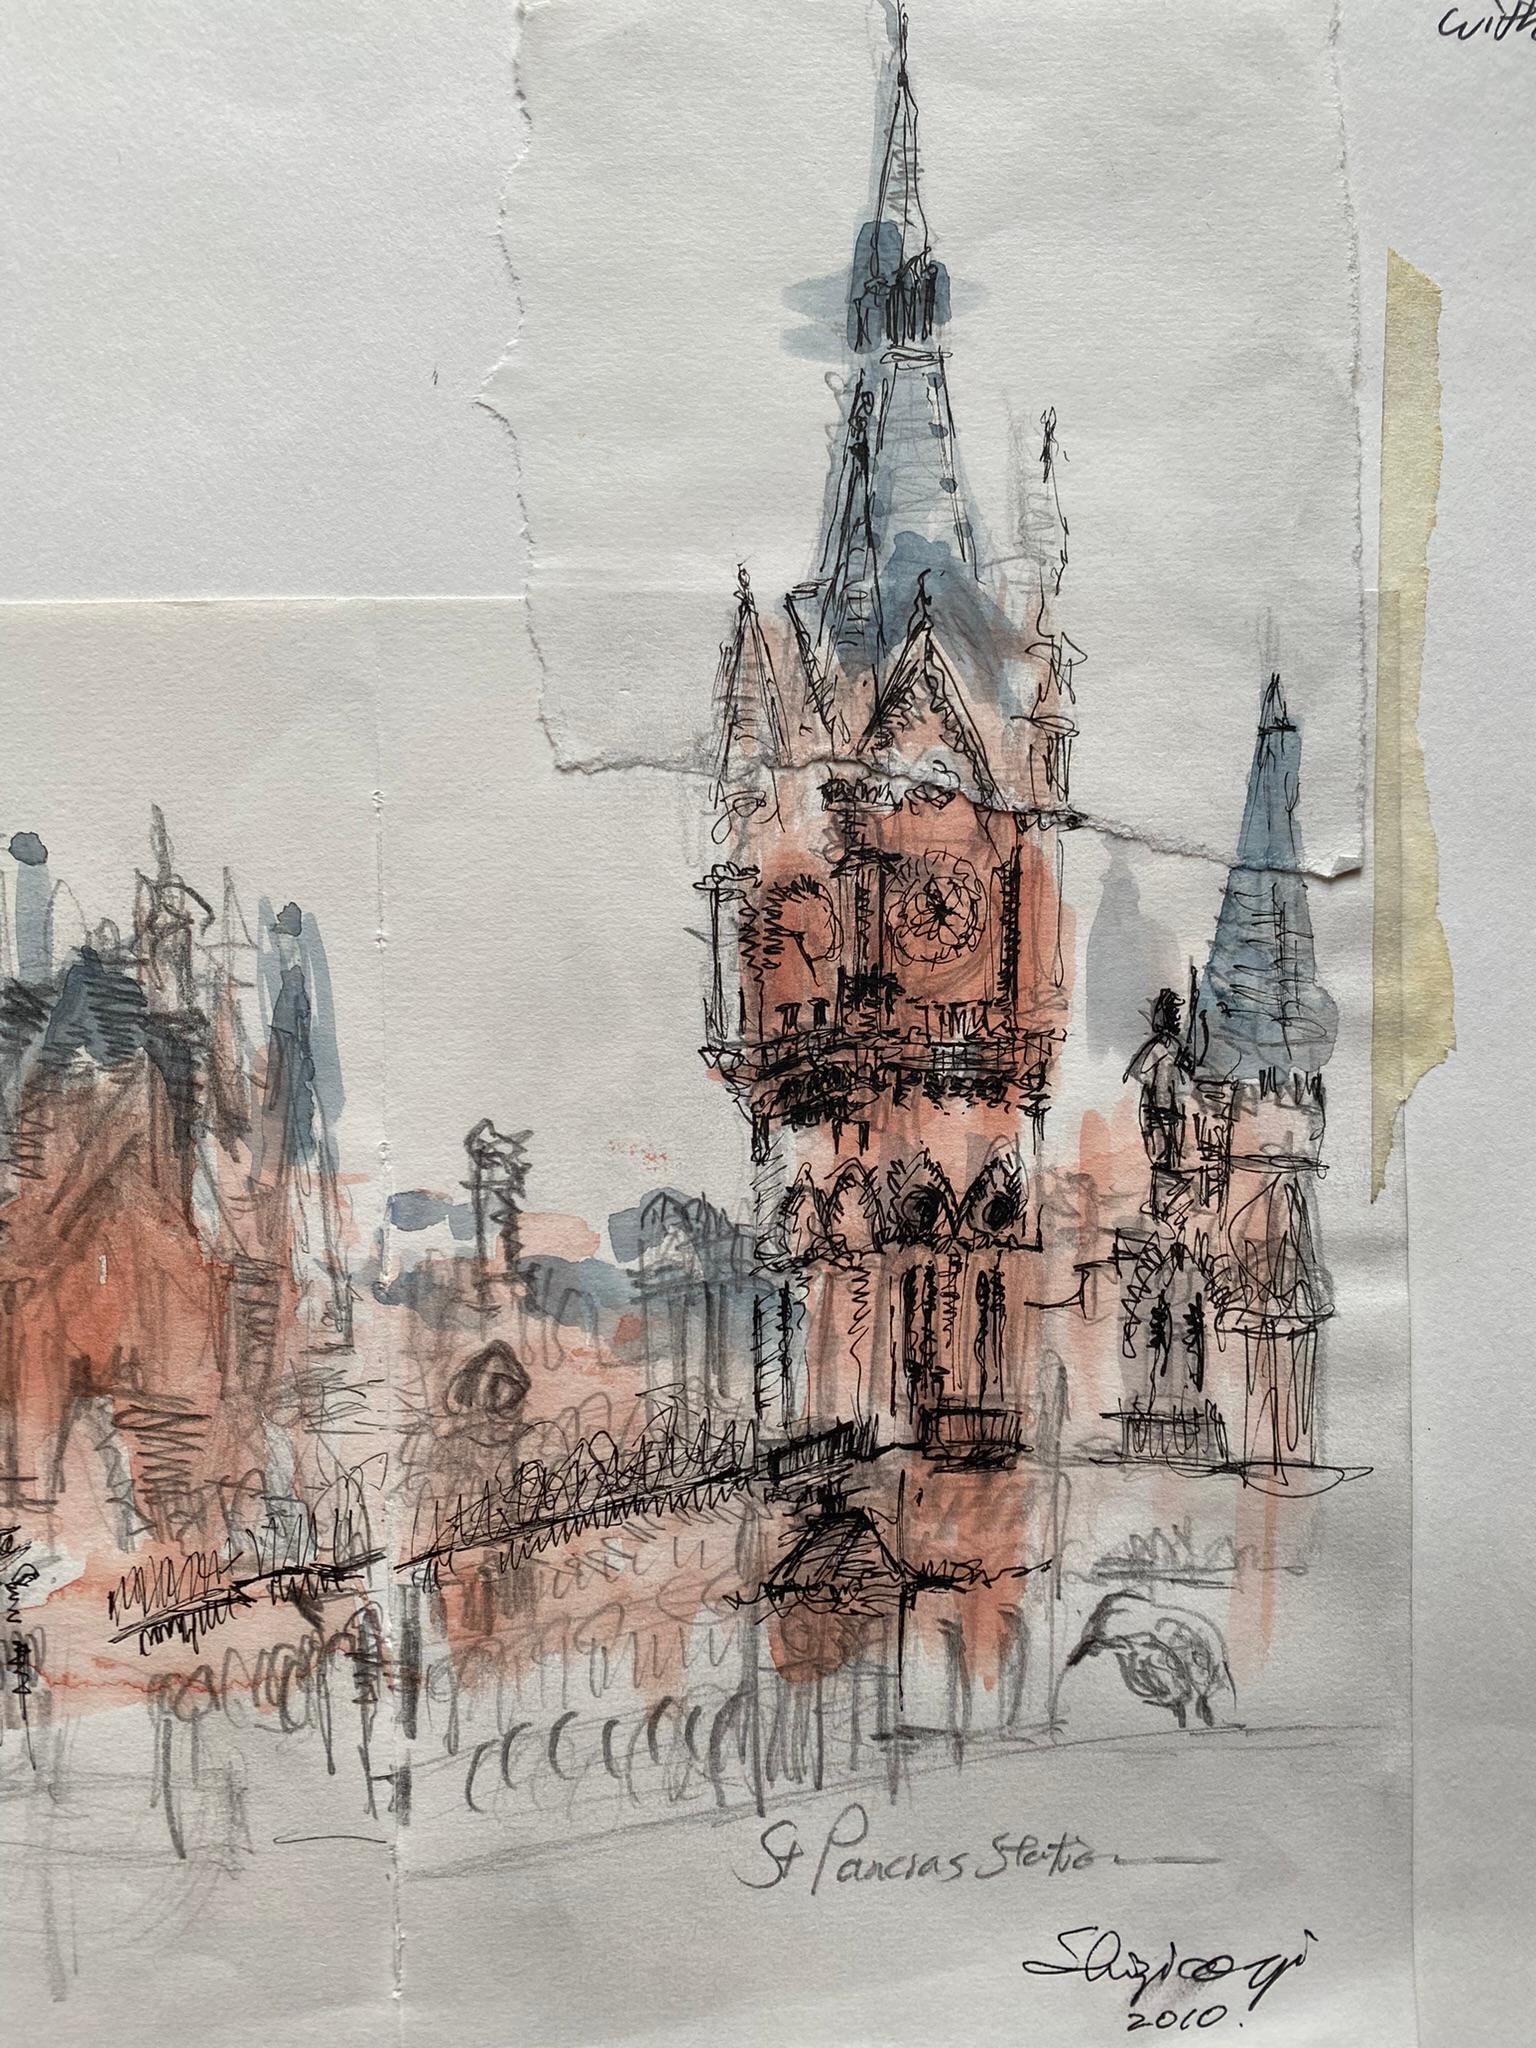 This Ink and watercolour masterpiece is featured in Bloomsbury's 2011 publication, showcasing the artist's sketchbook (Note 1).
Created en plein air, Shizico Yi painted this piece in front of the iconic St Pancras Station, with a view from Euston